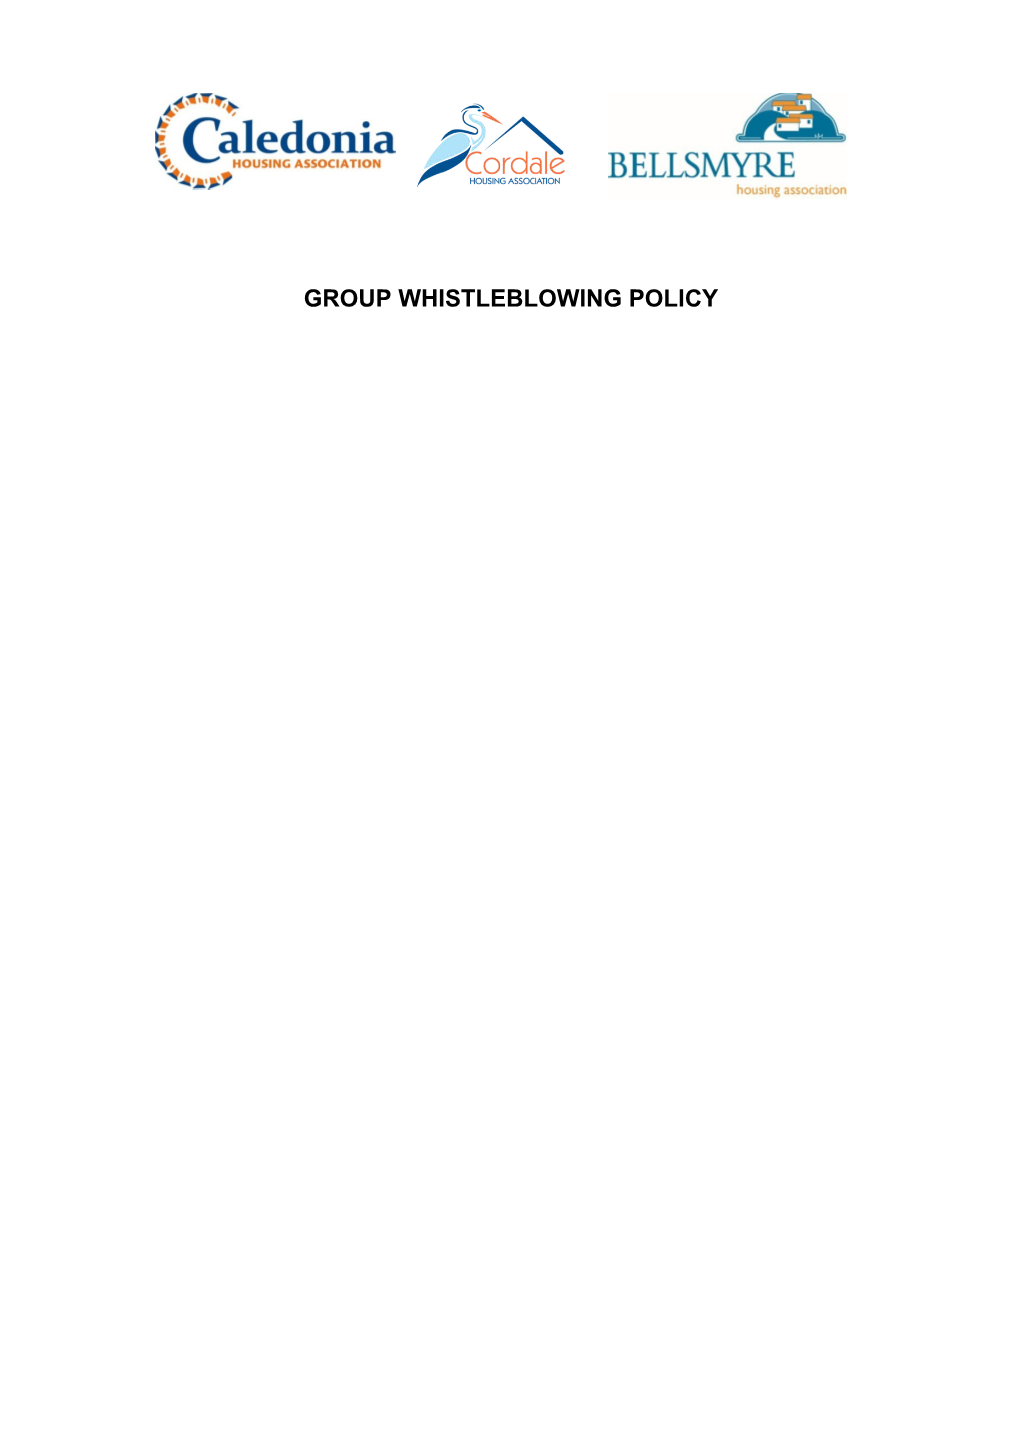 Group Whistleblowing Policy